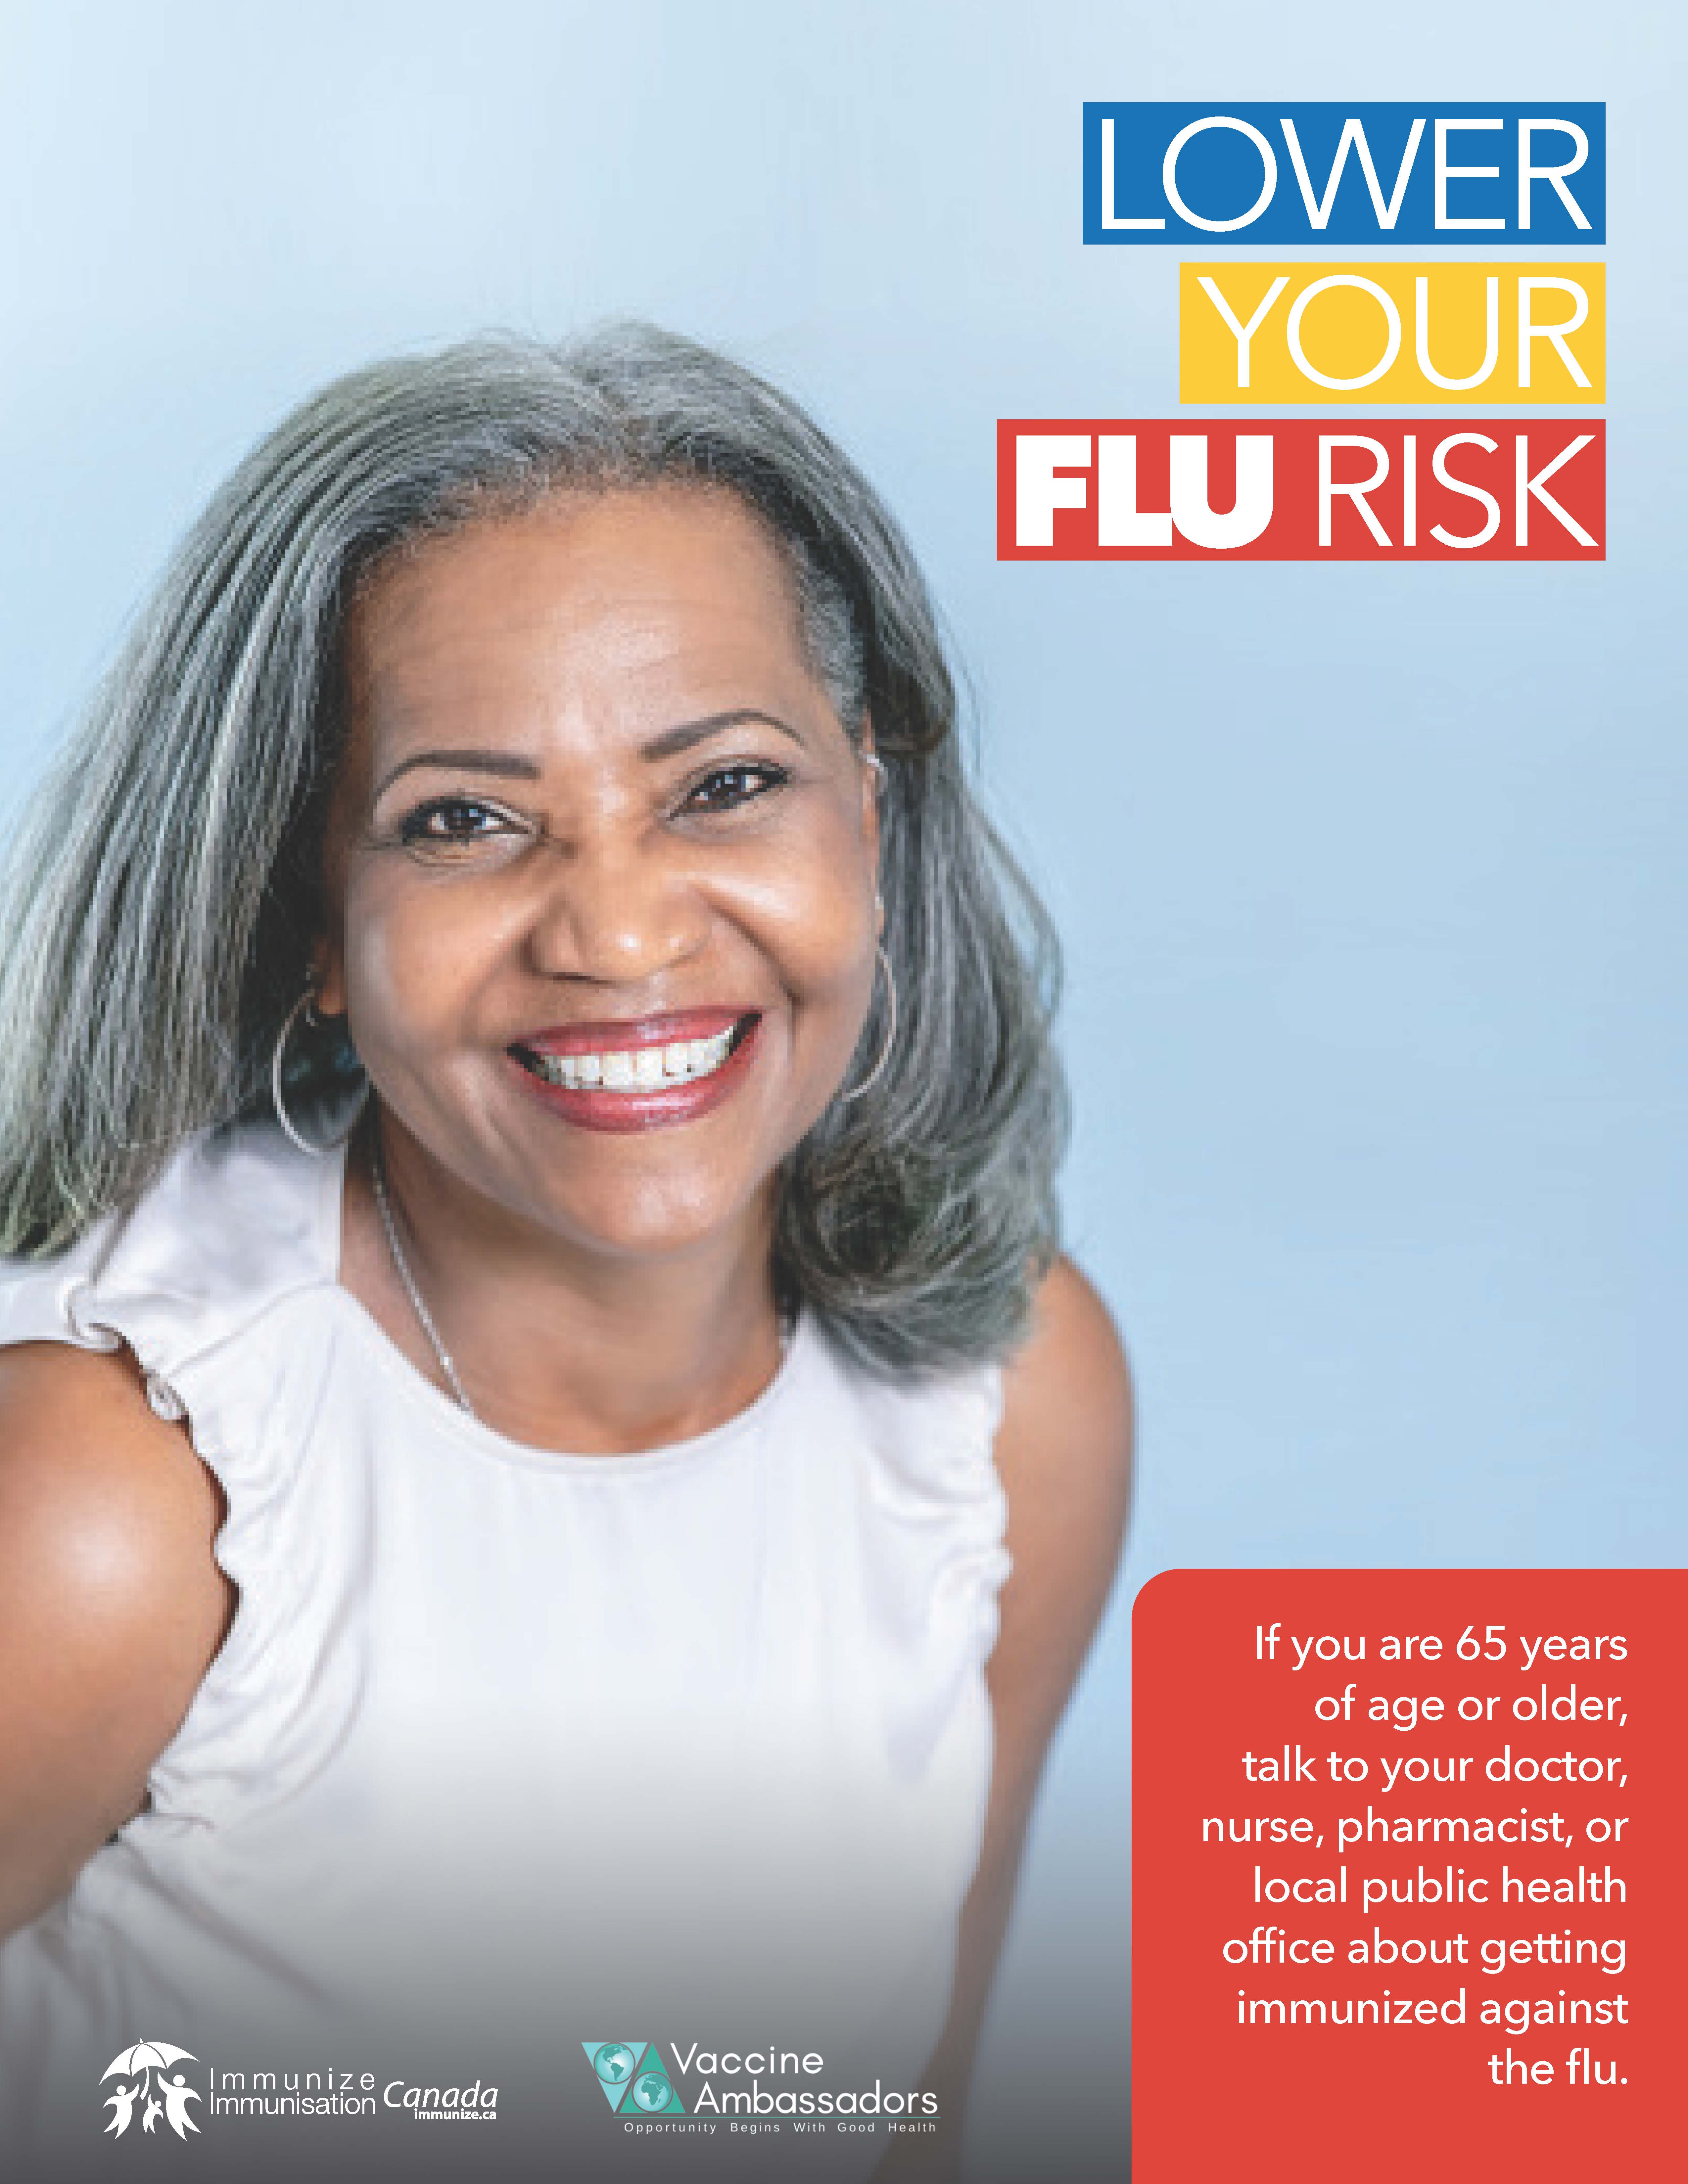 Lower your flu risk - adults 65 years of age and older - poster